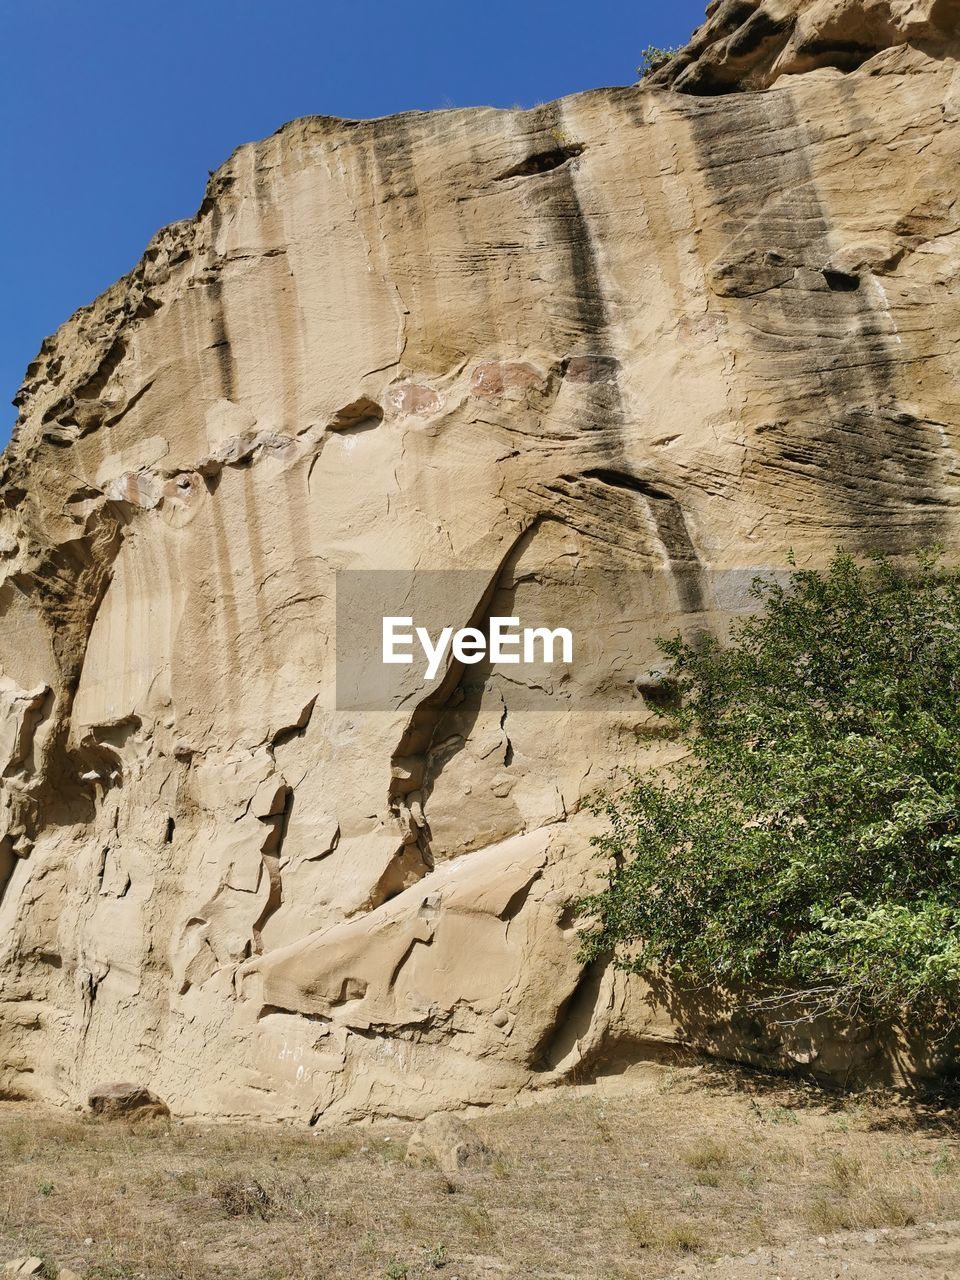 LOW ANGLE VIEW OF ROCK FORMATION ON LAND AGAINST SKY